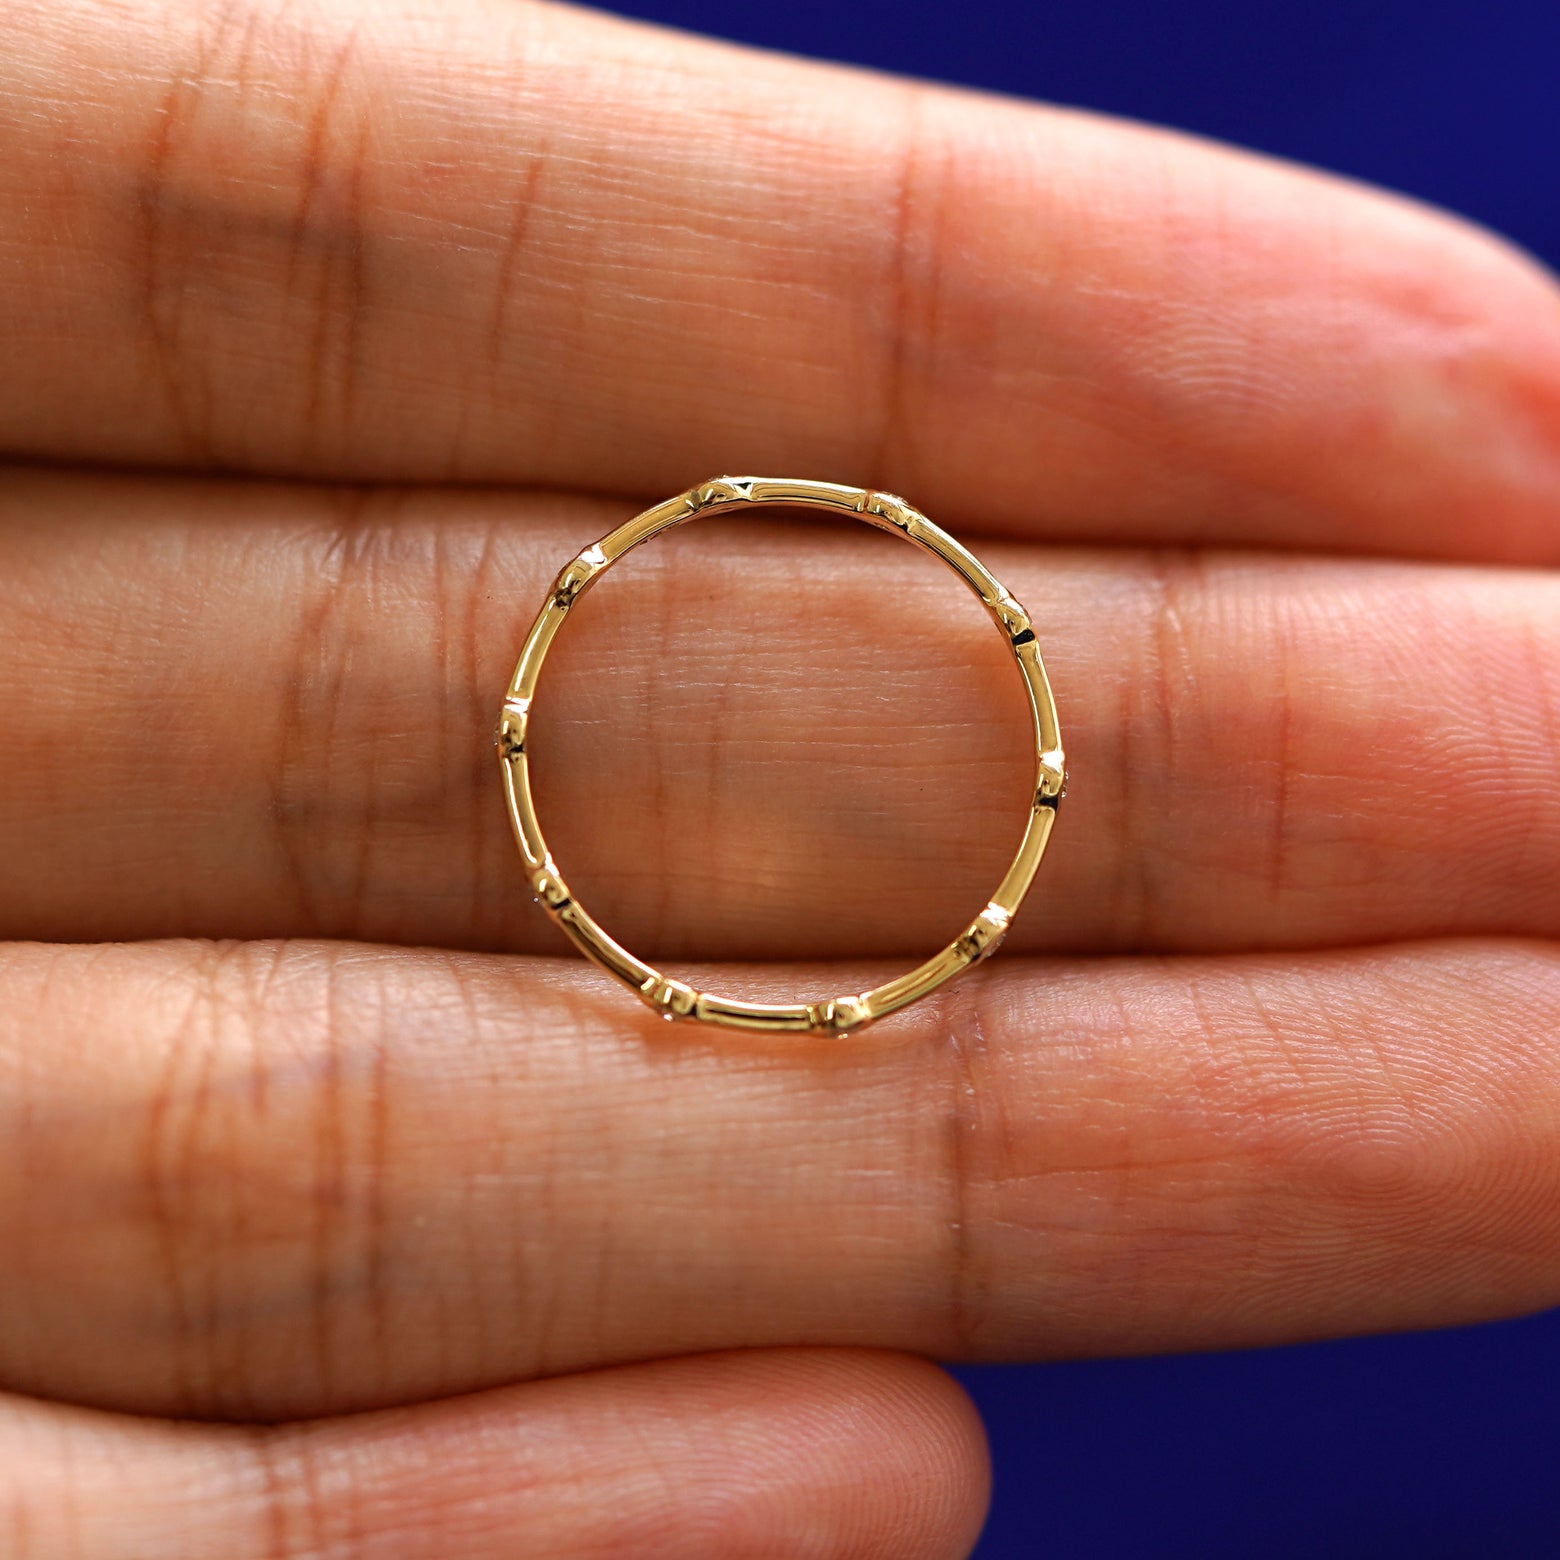 A yellow gold Spaced Infinity Ring in a model's hand showing the thickness of the band